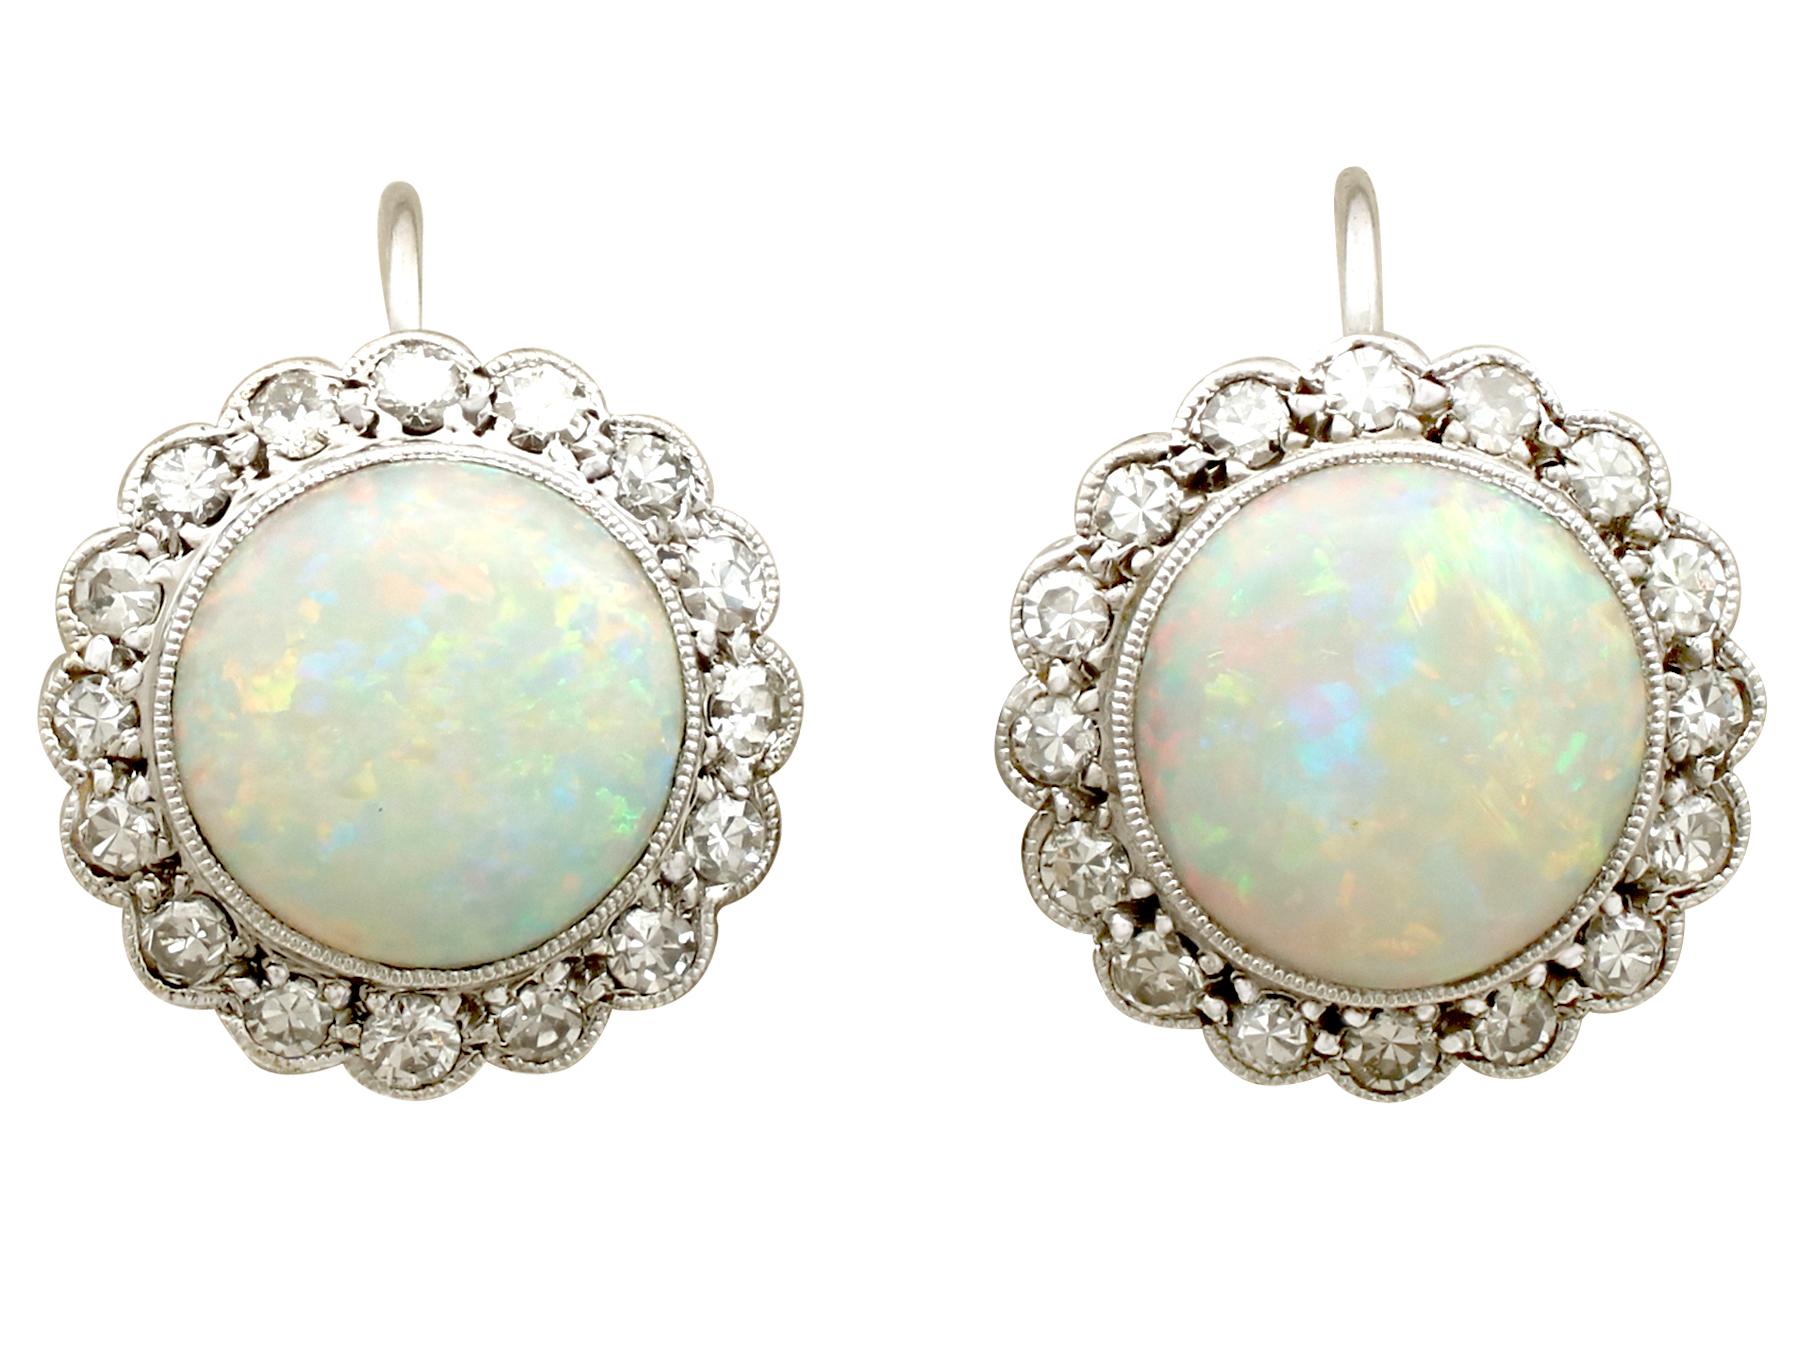 Women's 1920s 8.18 Carat Opal and Diamond Earring and Pendant Set For Sale